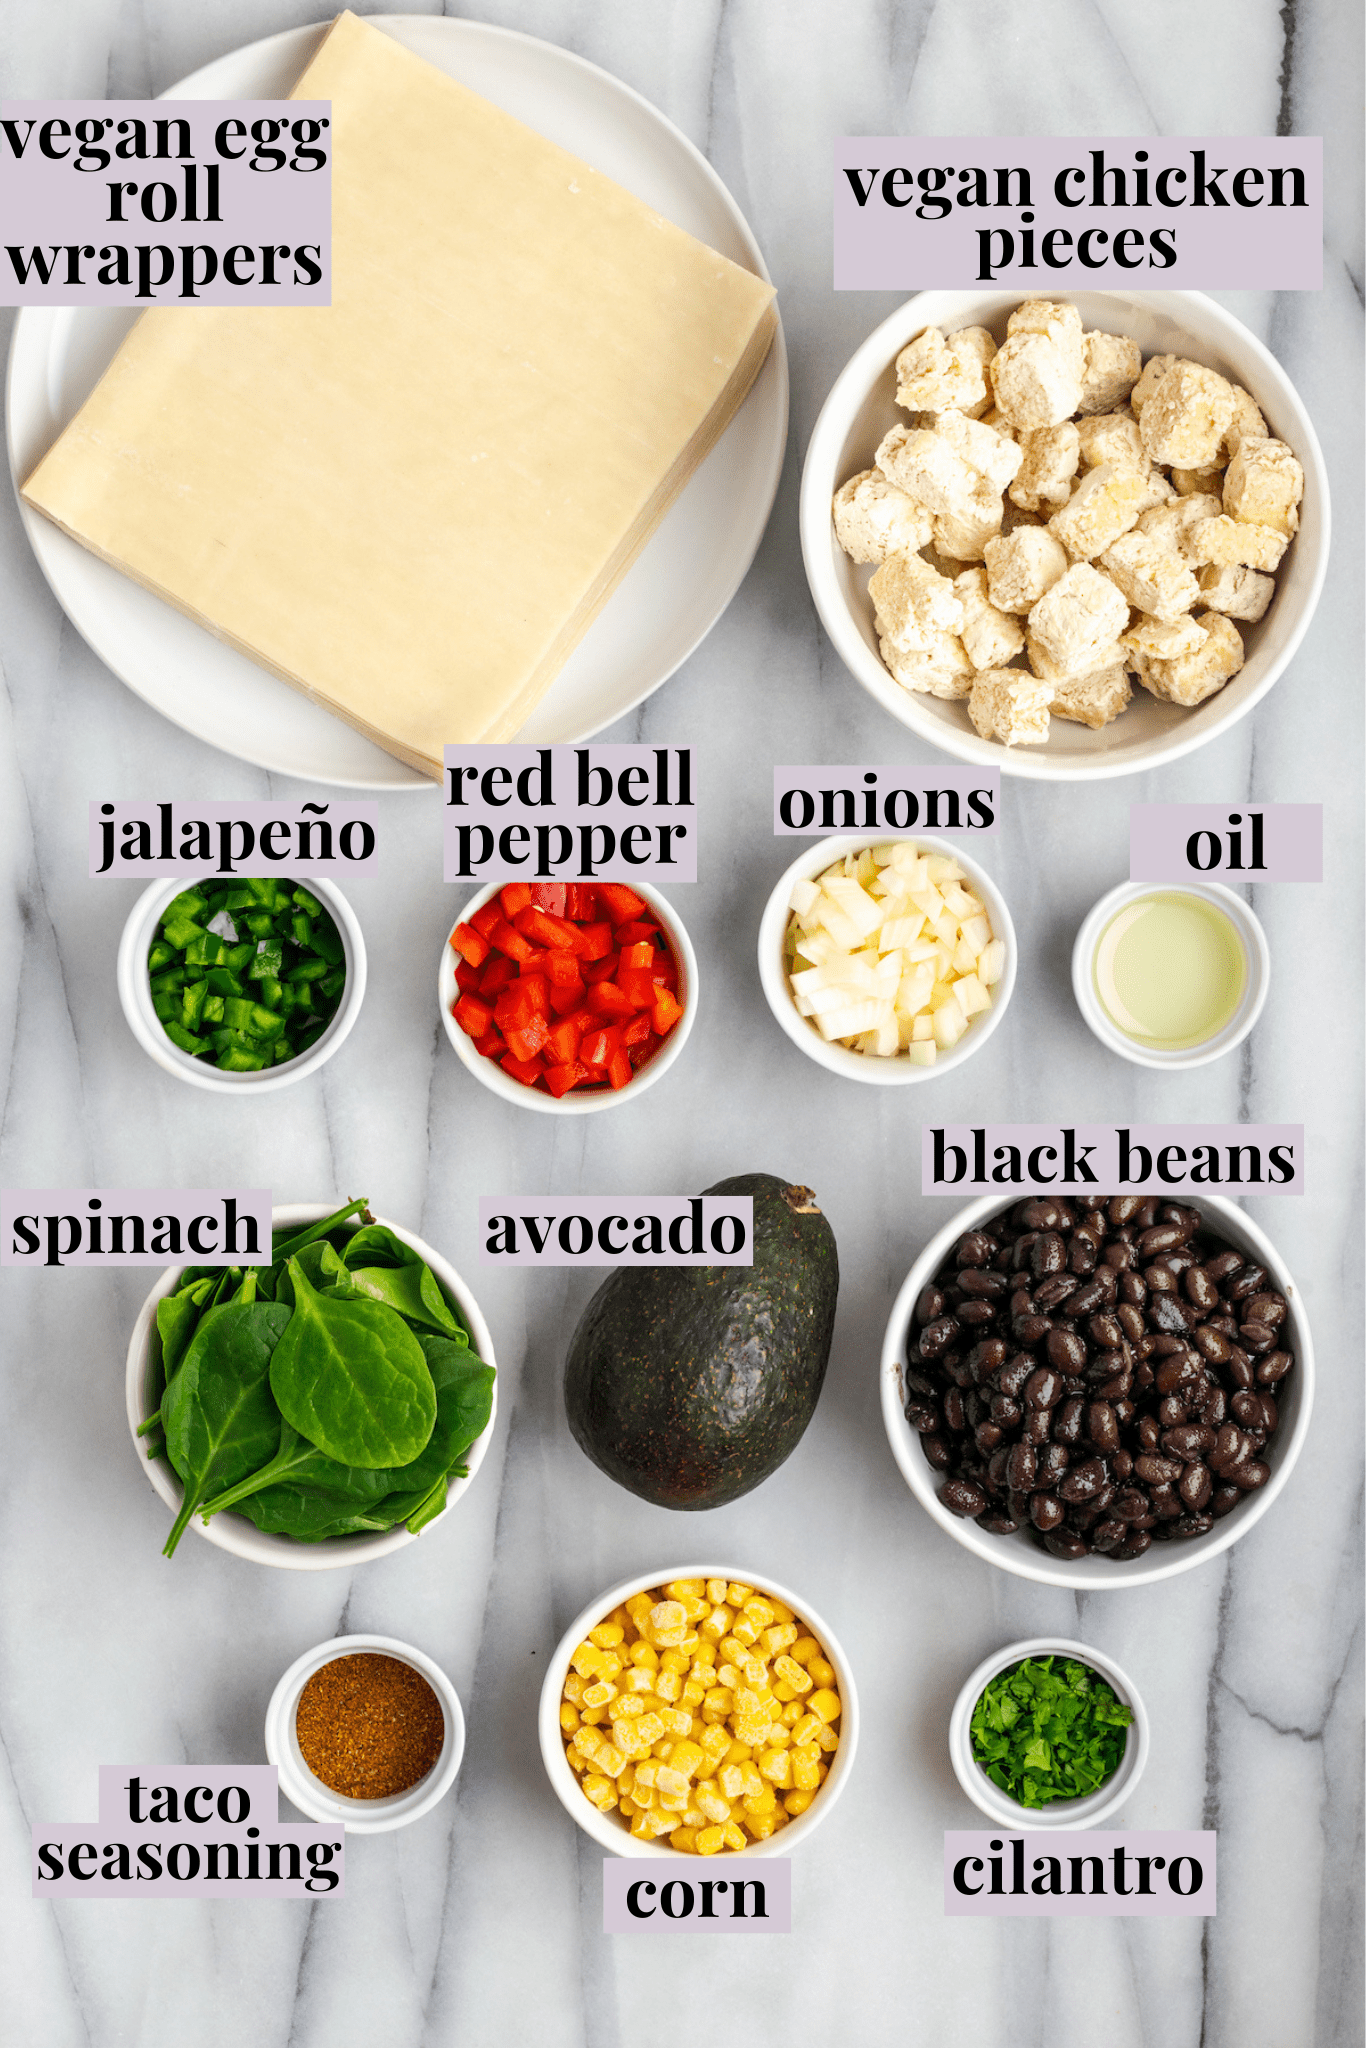 Overhead view of ingredients for vegan southwest egg rolls with labels